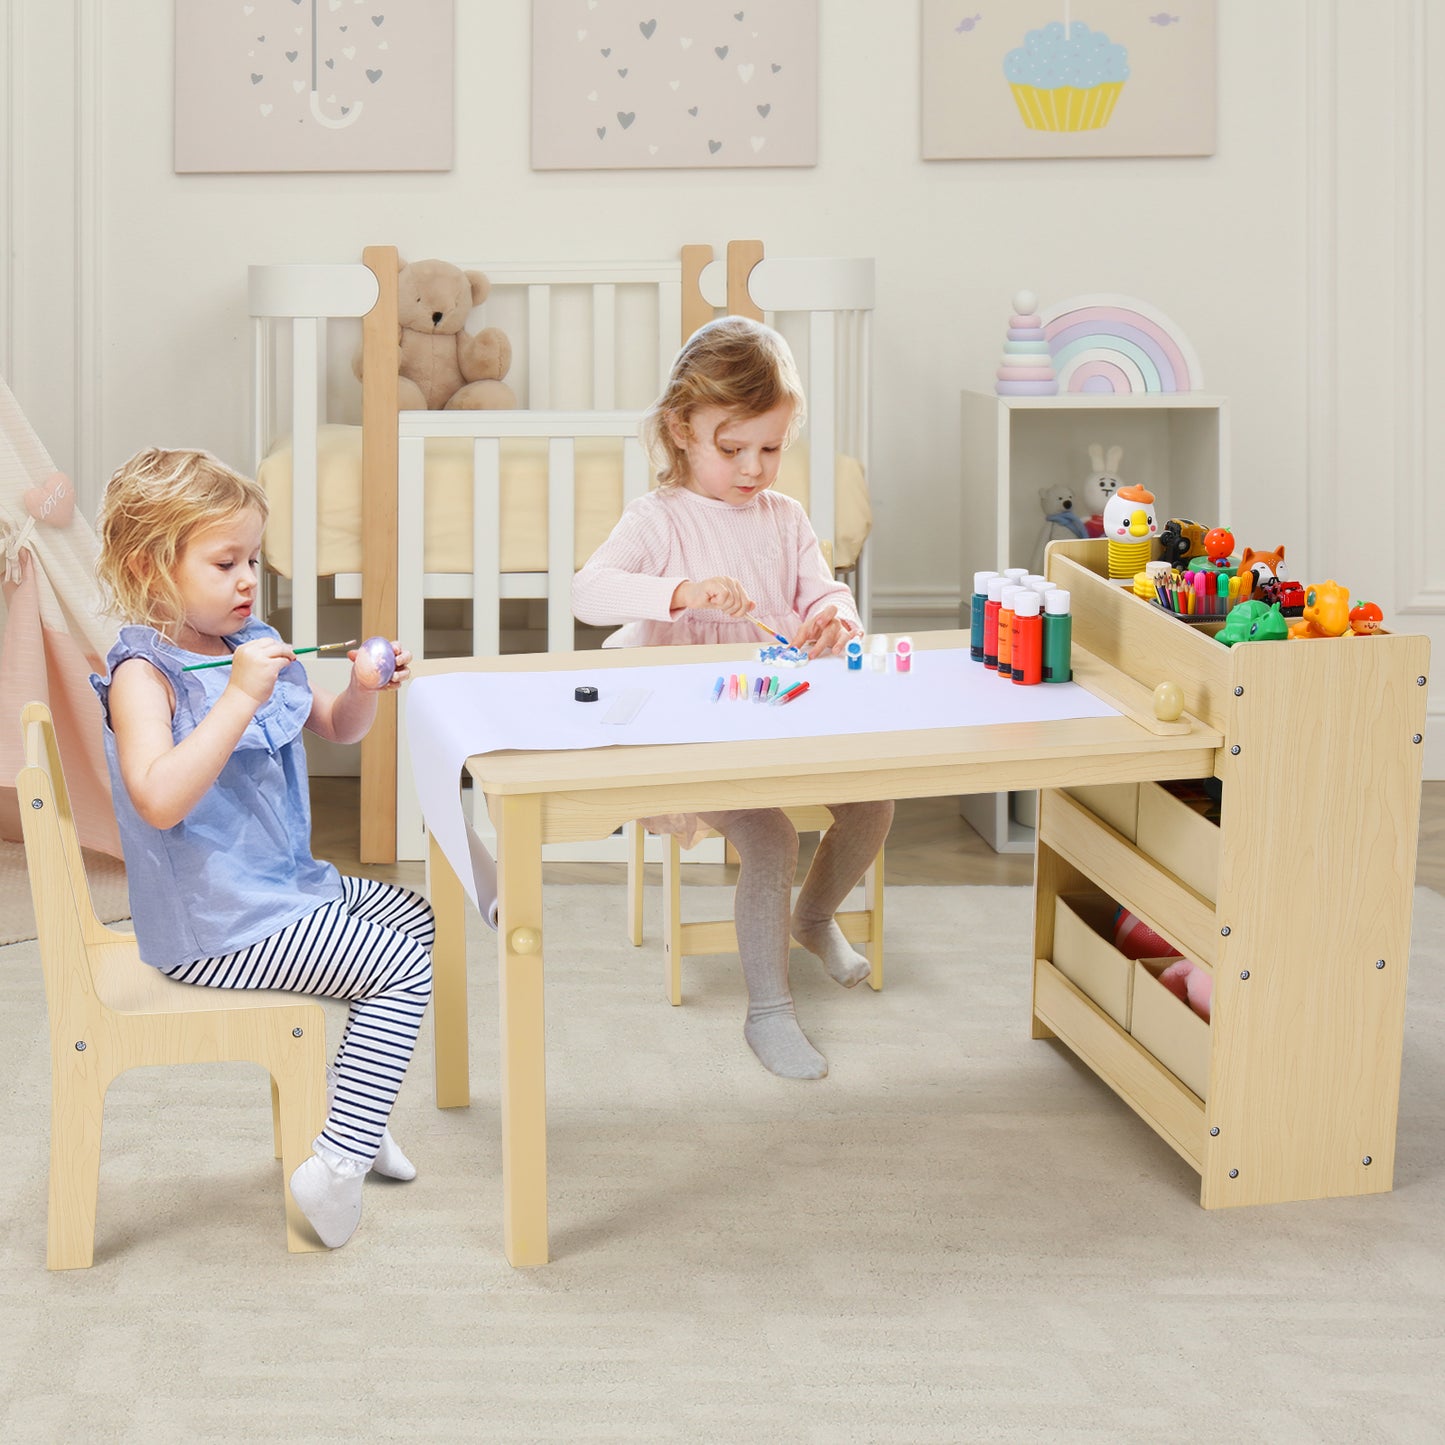 Arlopu Kids Art Table and Chair Set, Wooden Toddler Activity Table Drawing Craft Desk with Paper Roll, 4 Storage Bins & Storage Shelves